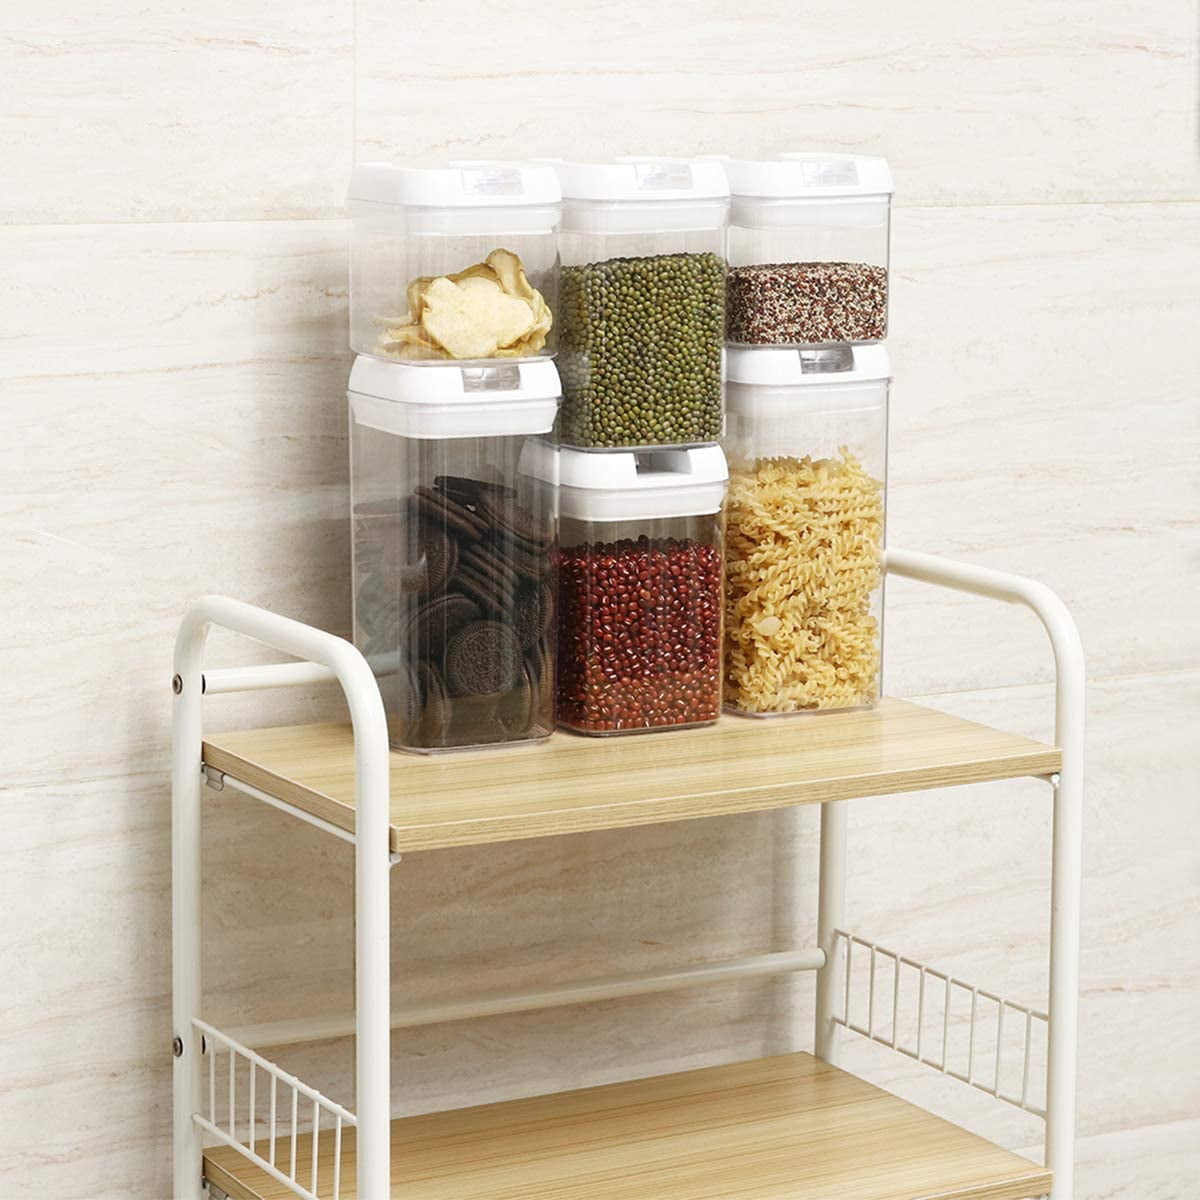 JDEFEG Food Organizers and Storage Airtight Food Storage Containers Set  with Lids Kitchen Pantry Organization Canisters for Cereal Flour and Sugar  600Ml Containers for Organizing Closet Pet White 